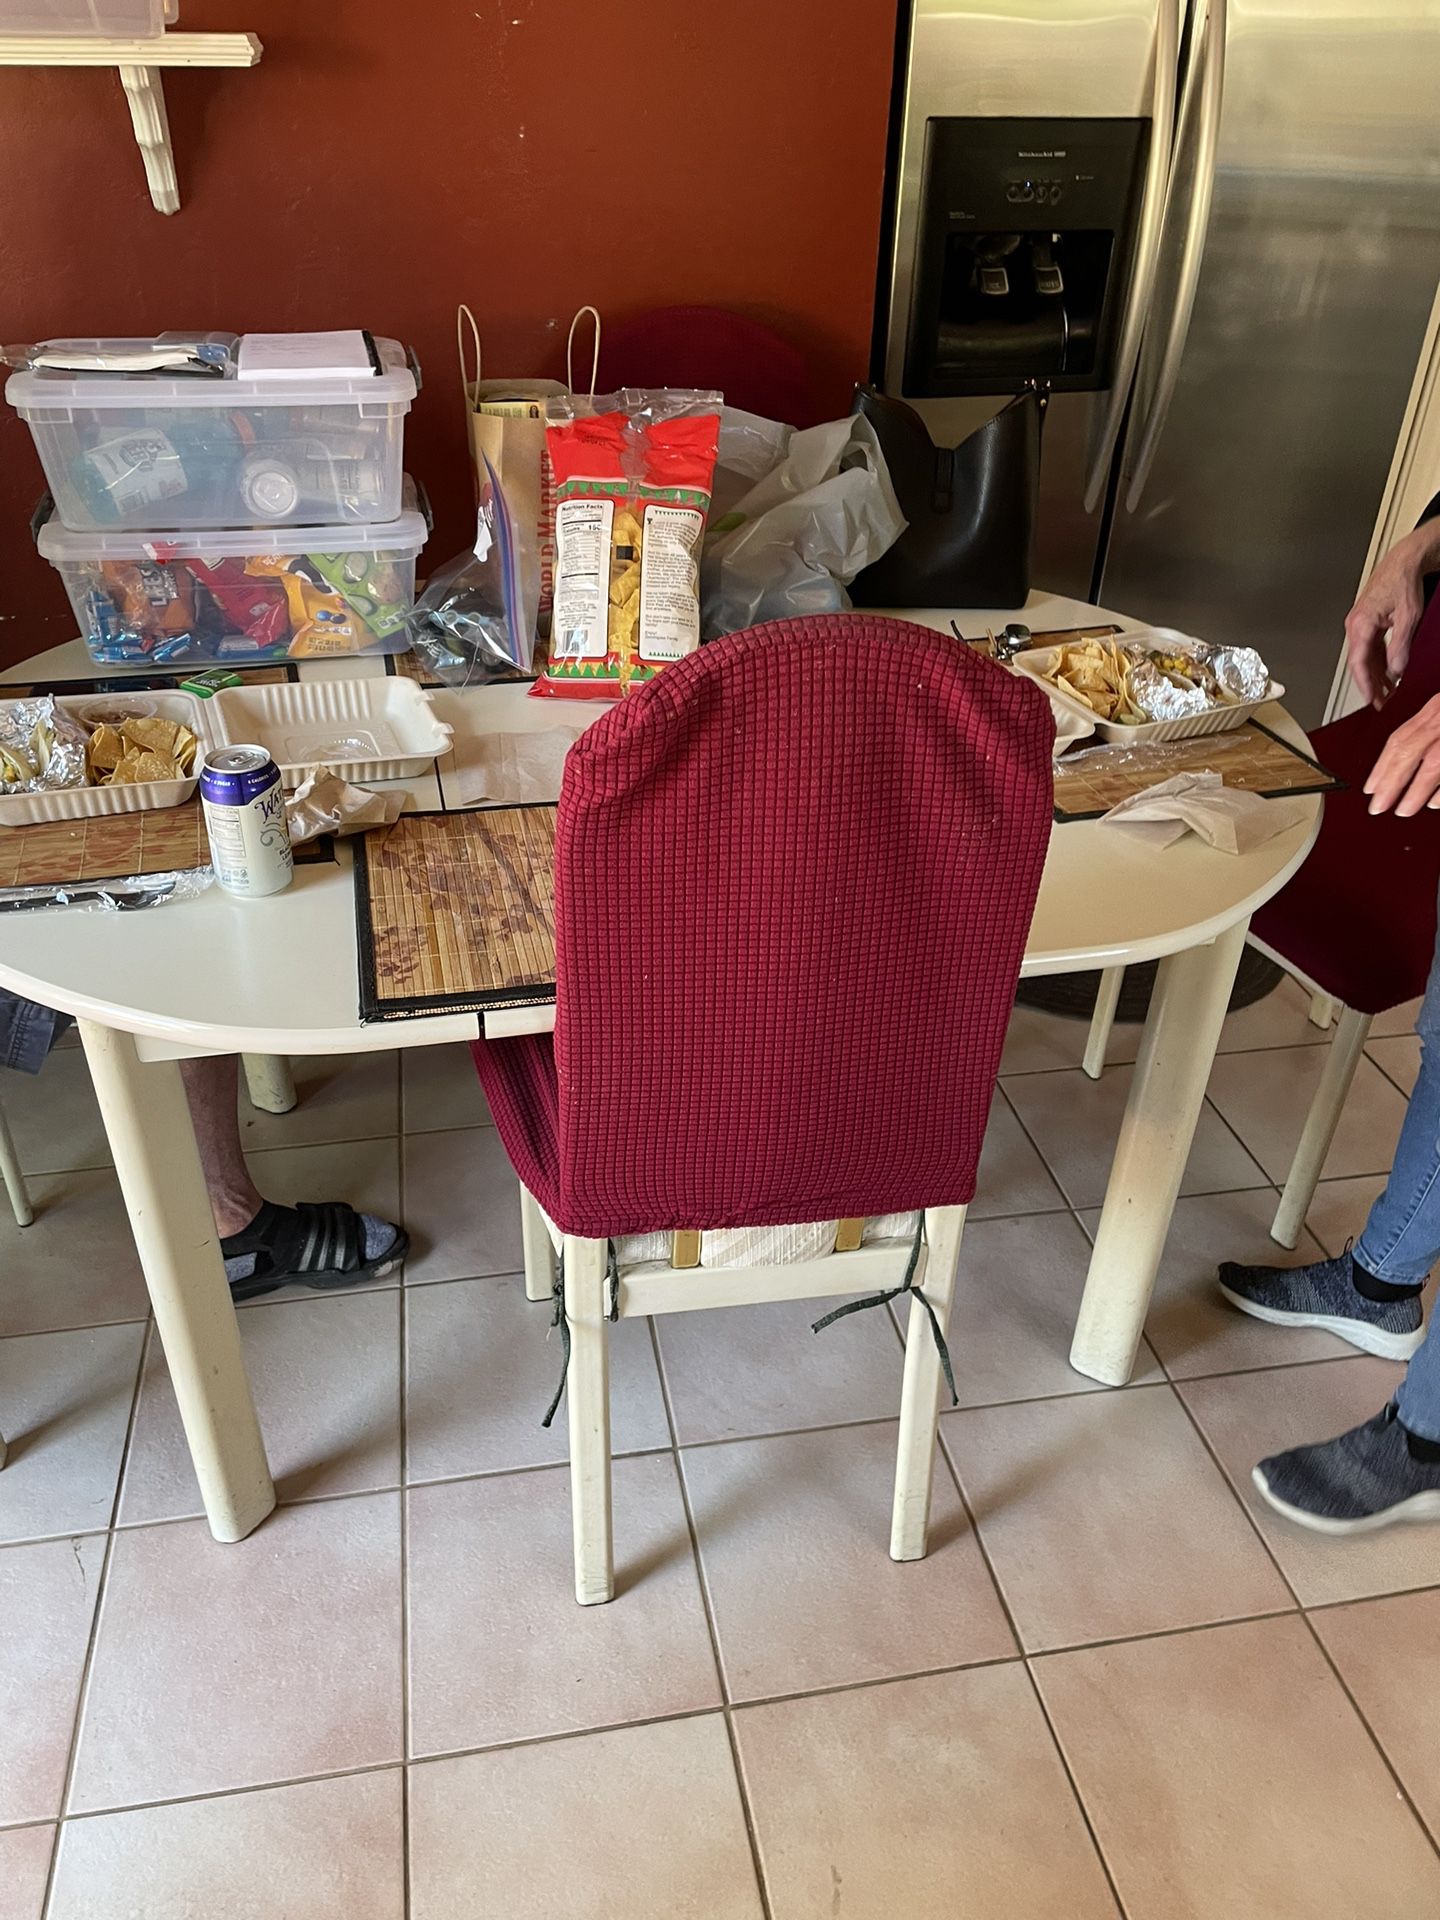 Kitchen Table And 4 Chairs - Free